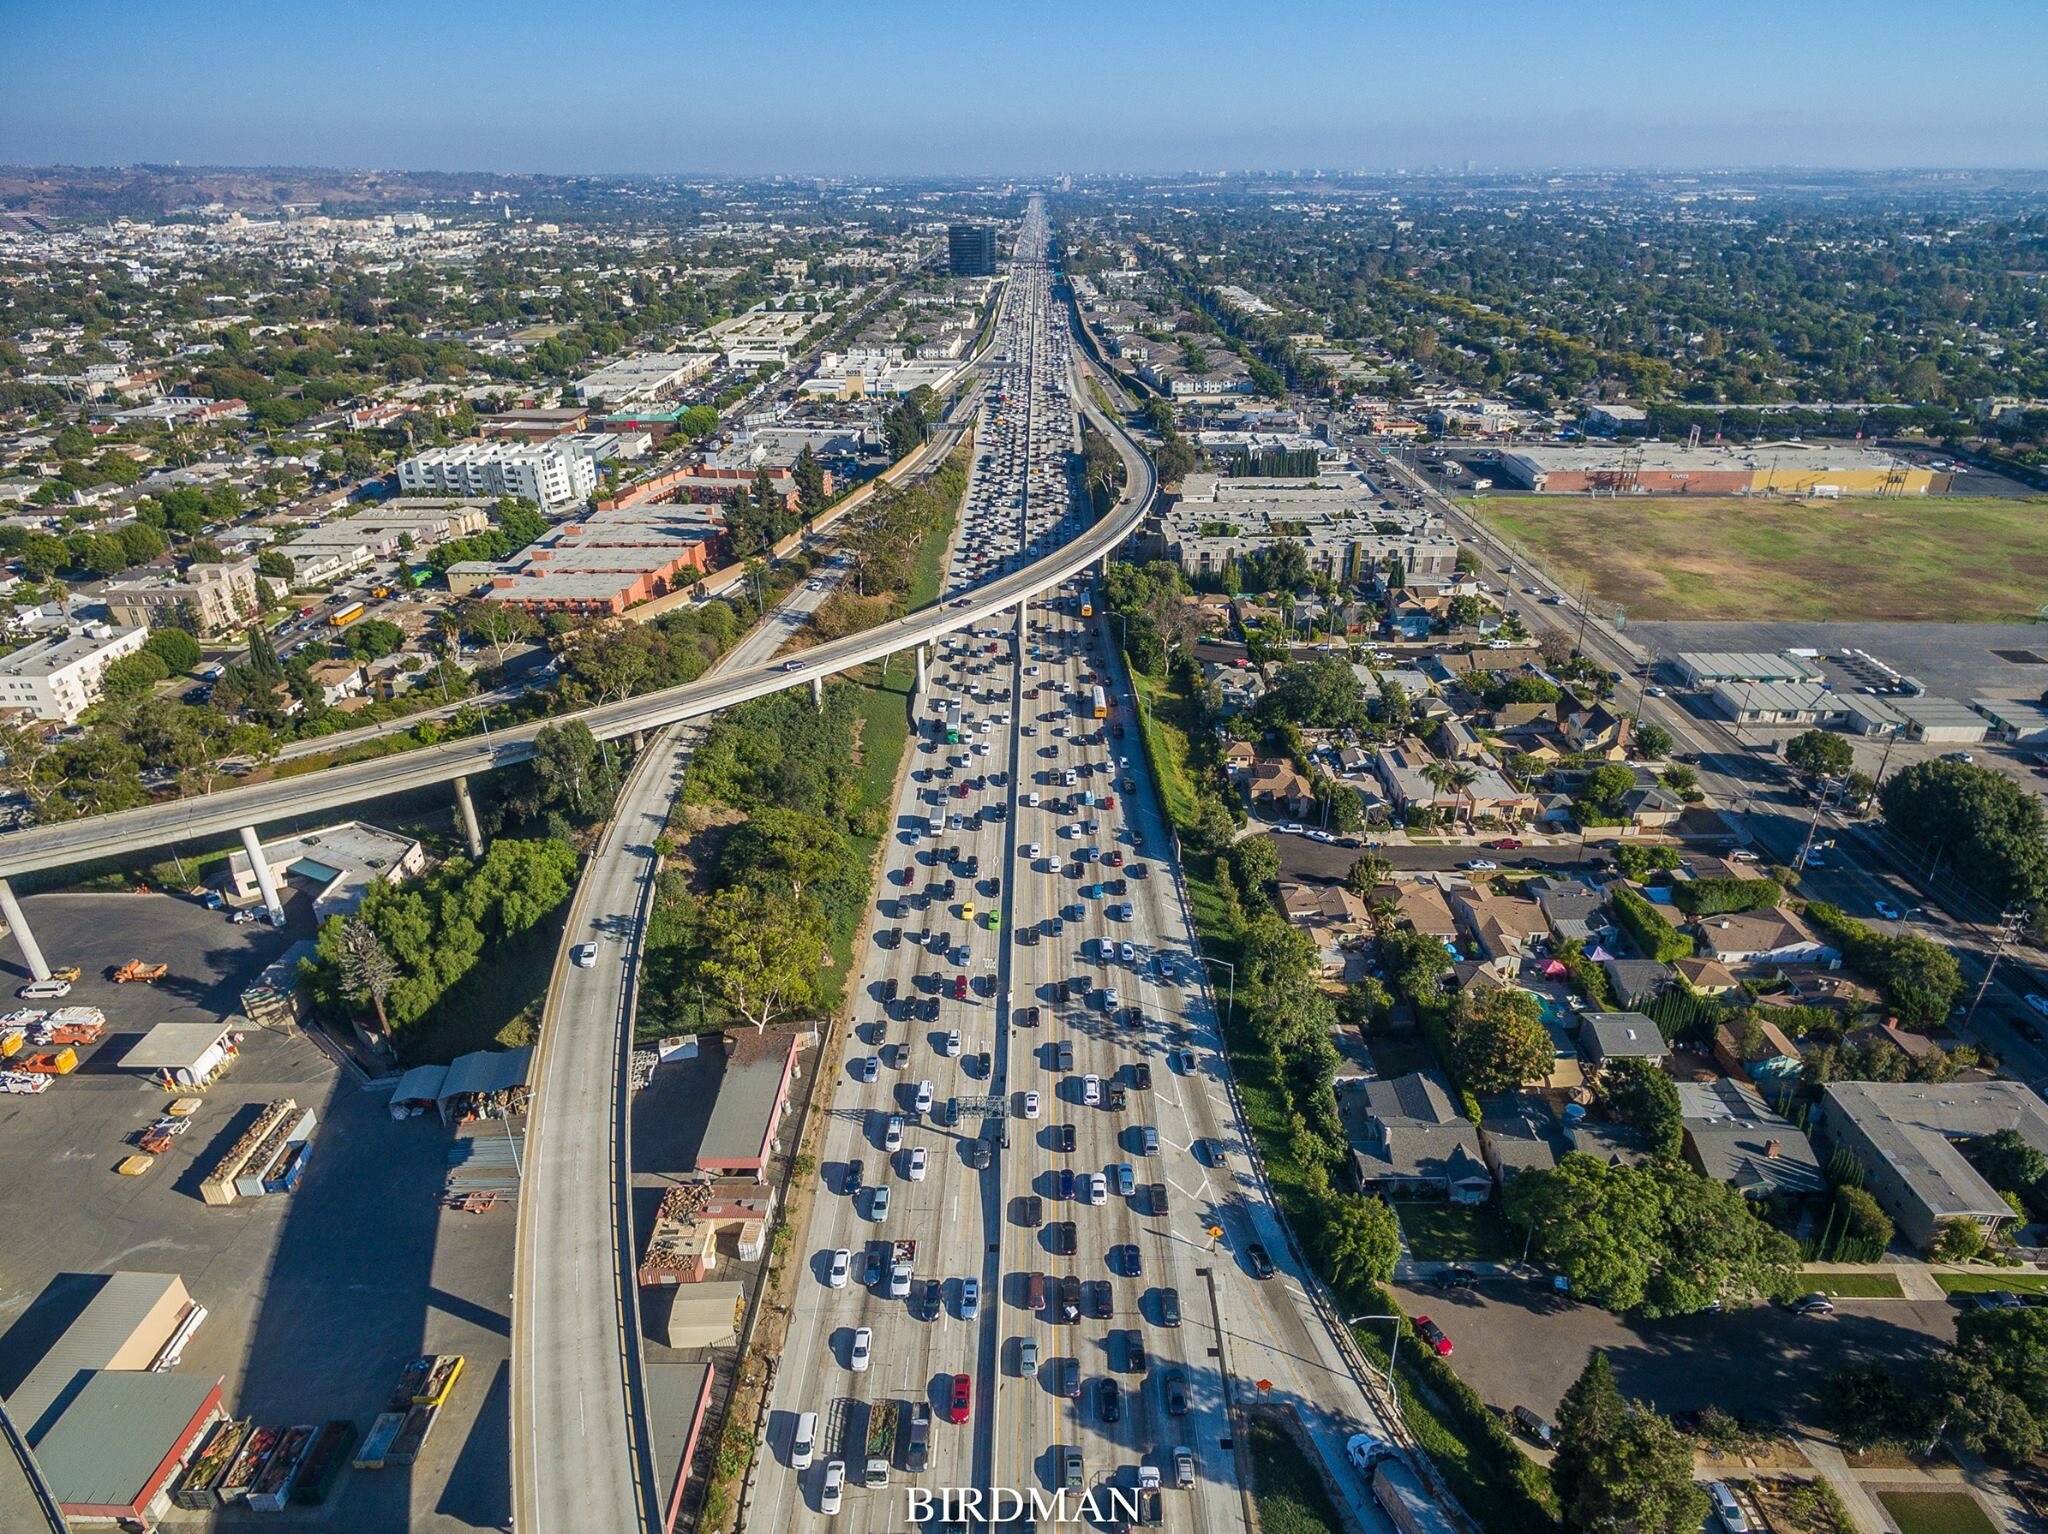 405 at rush hour - Los Angeles, CA